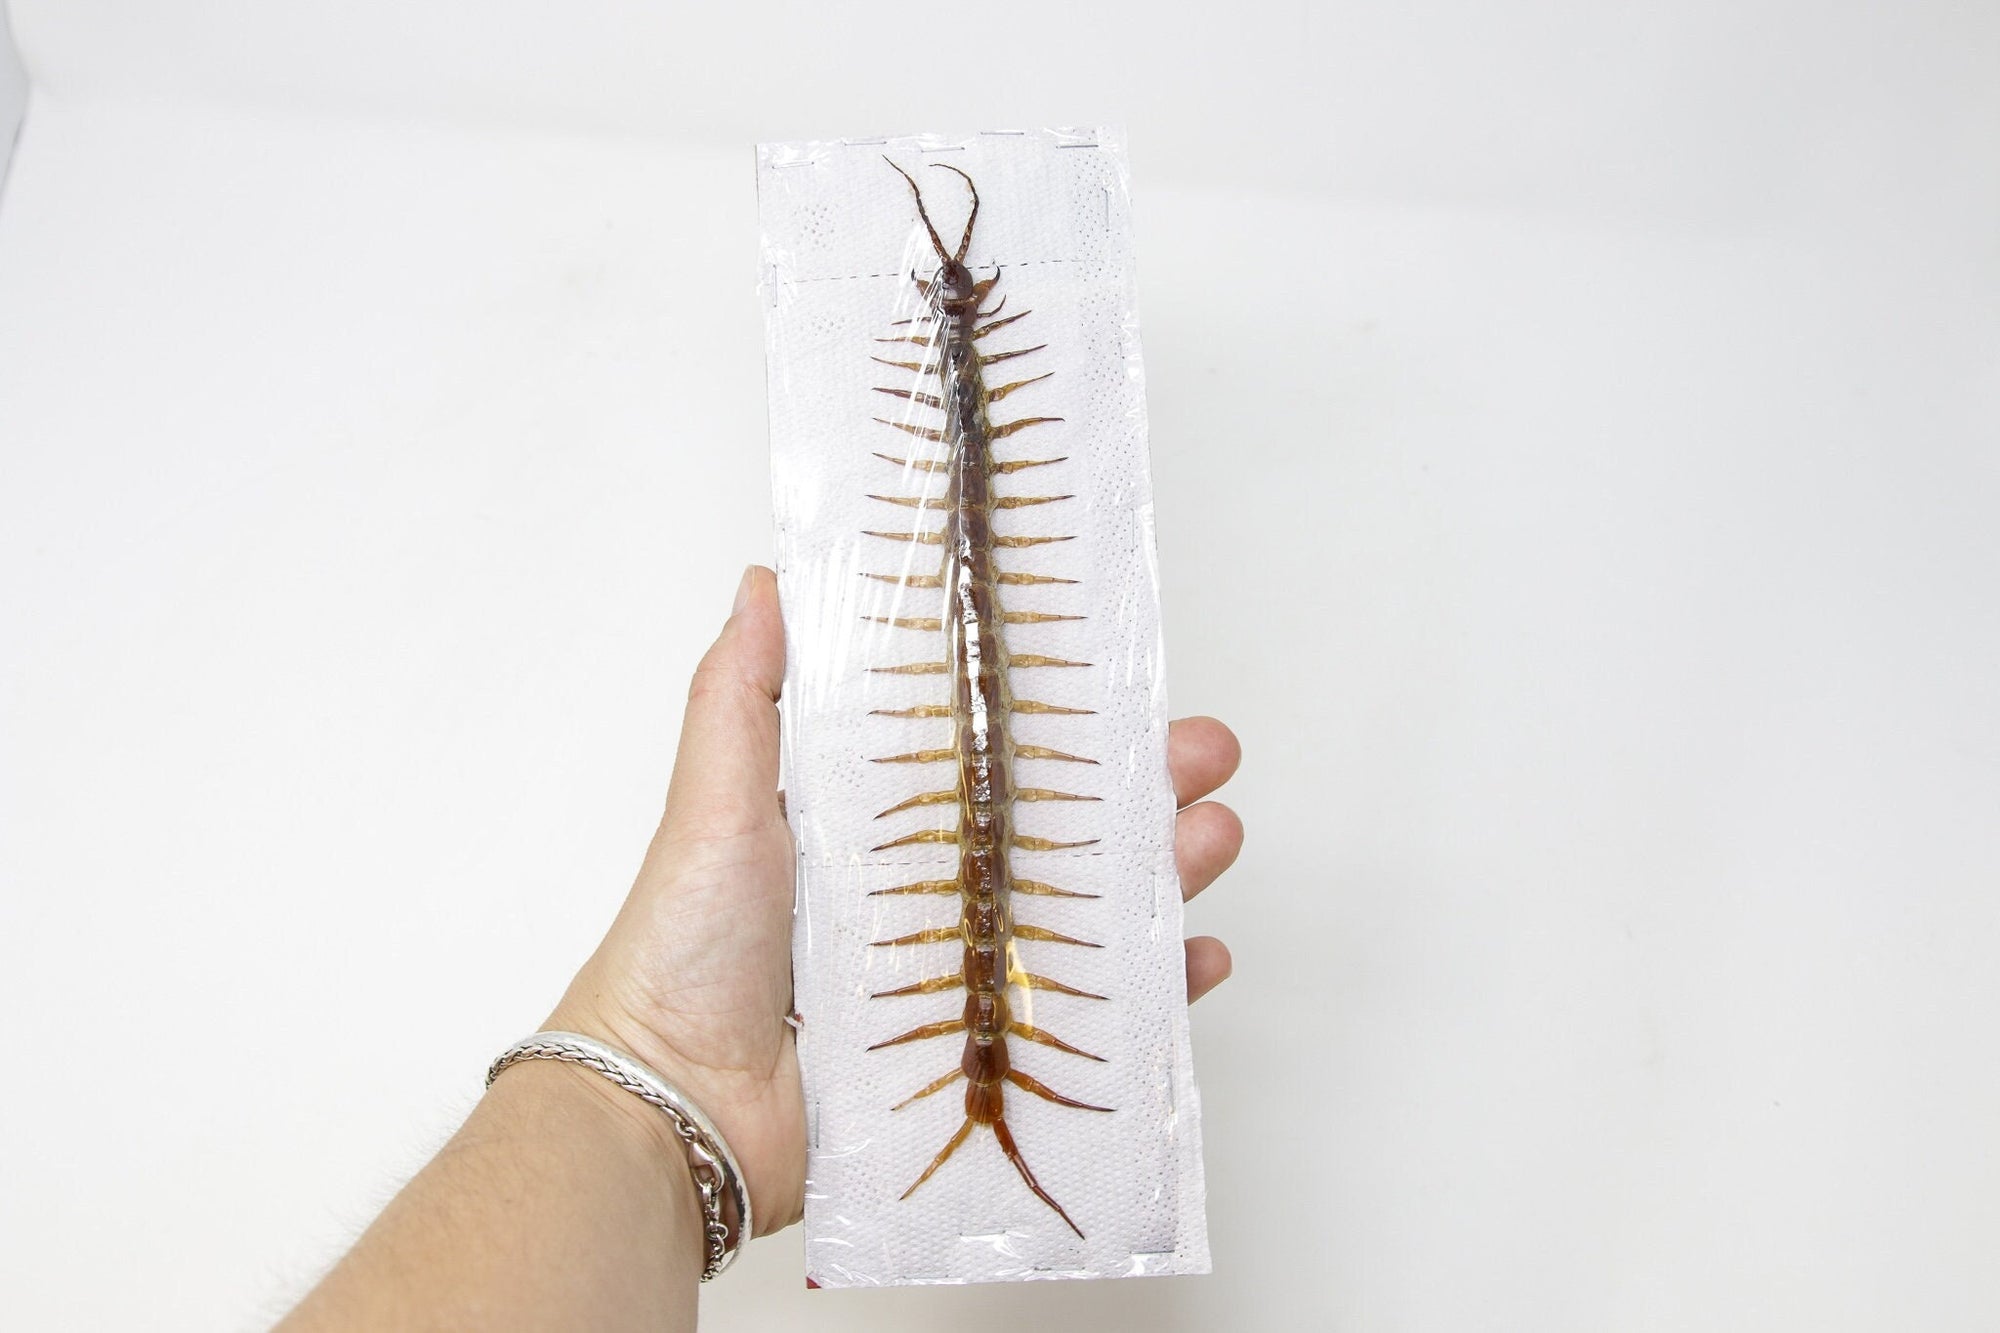 Pack of 10 Giant Centipedes (Scolopendra subspinipes) 6-8 Inches Spread Specimens, Ideal for Framing